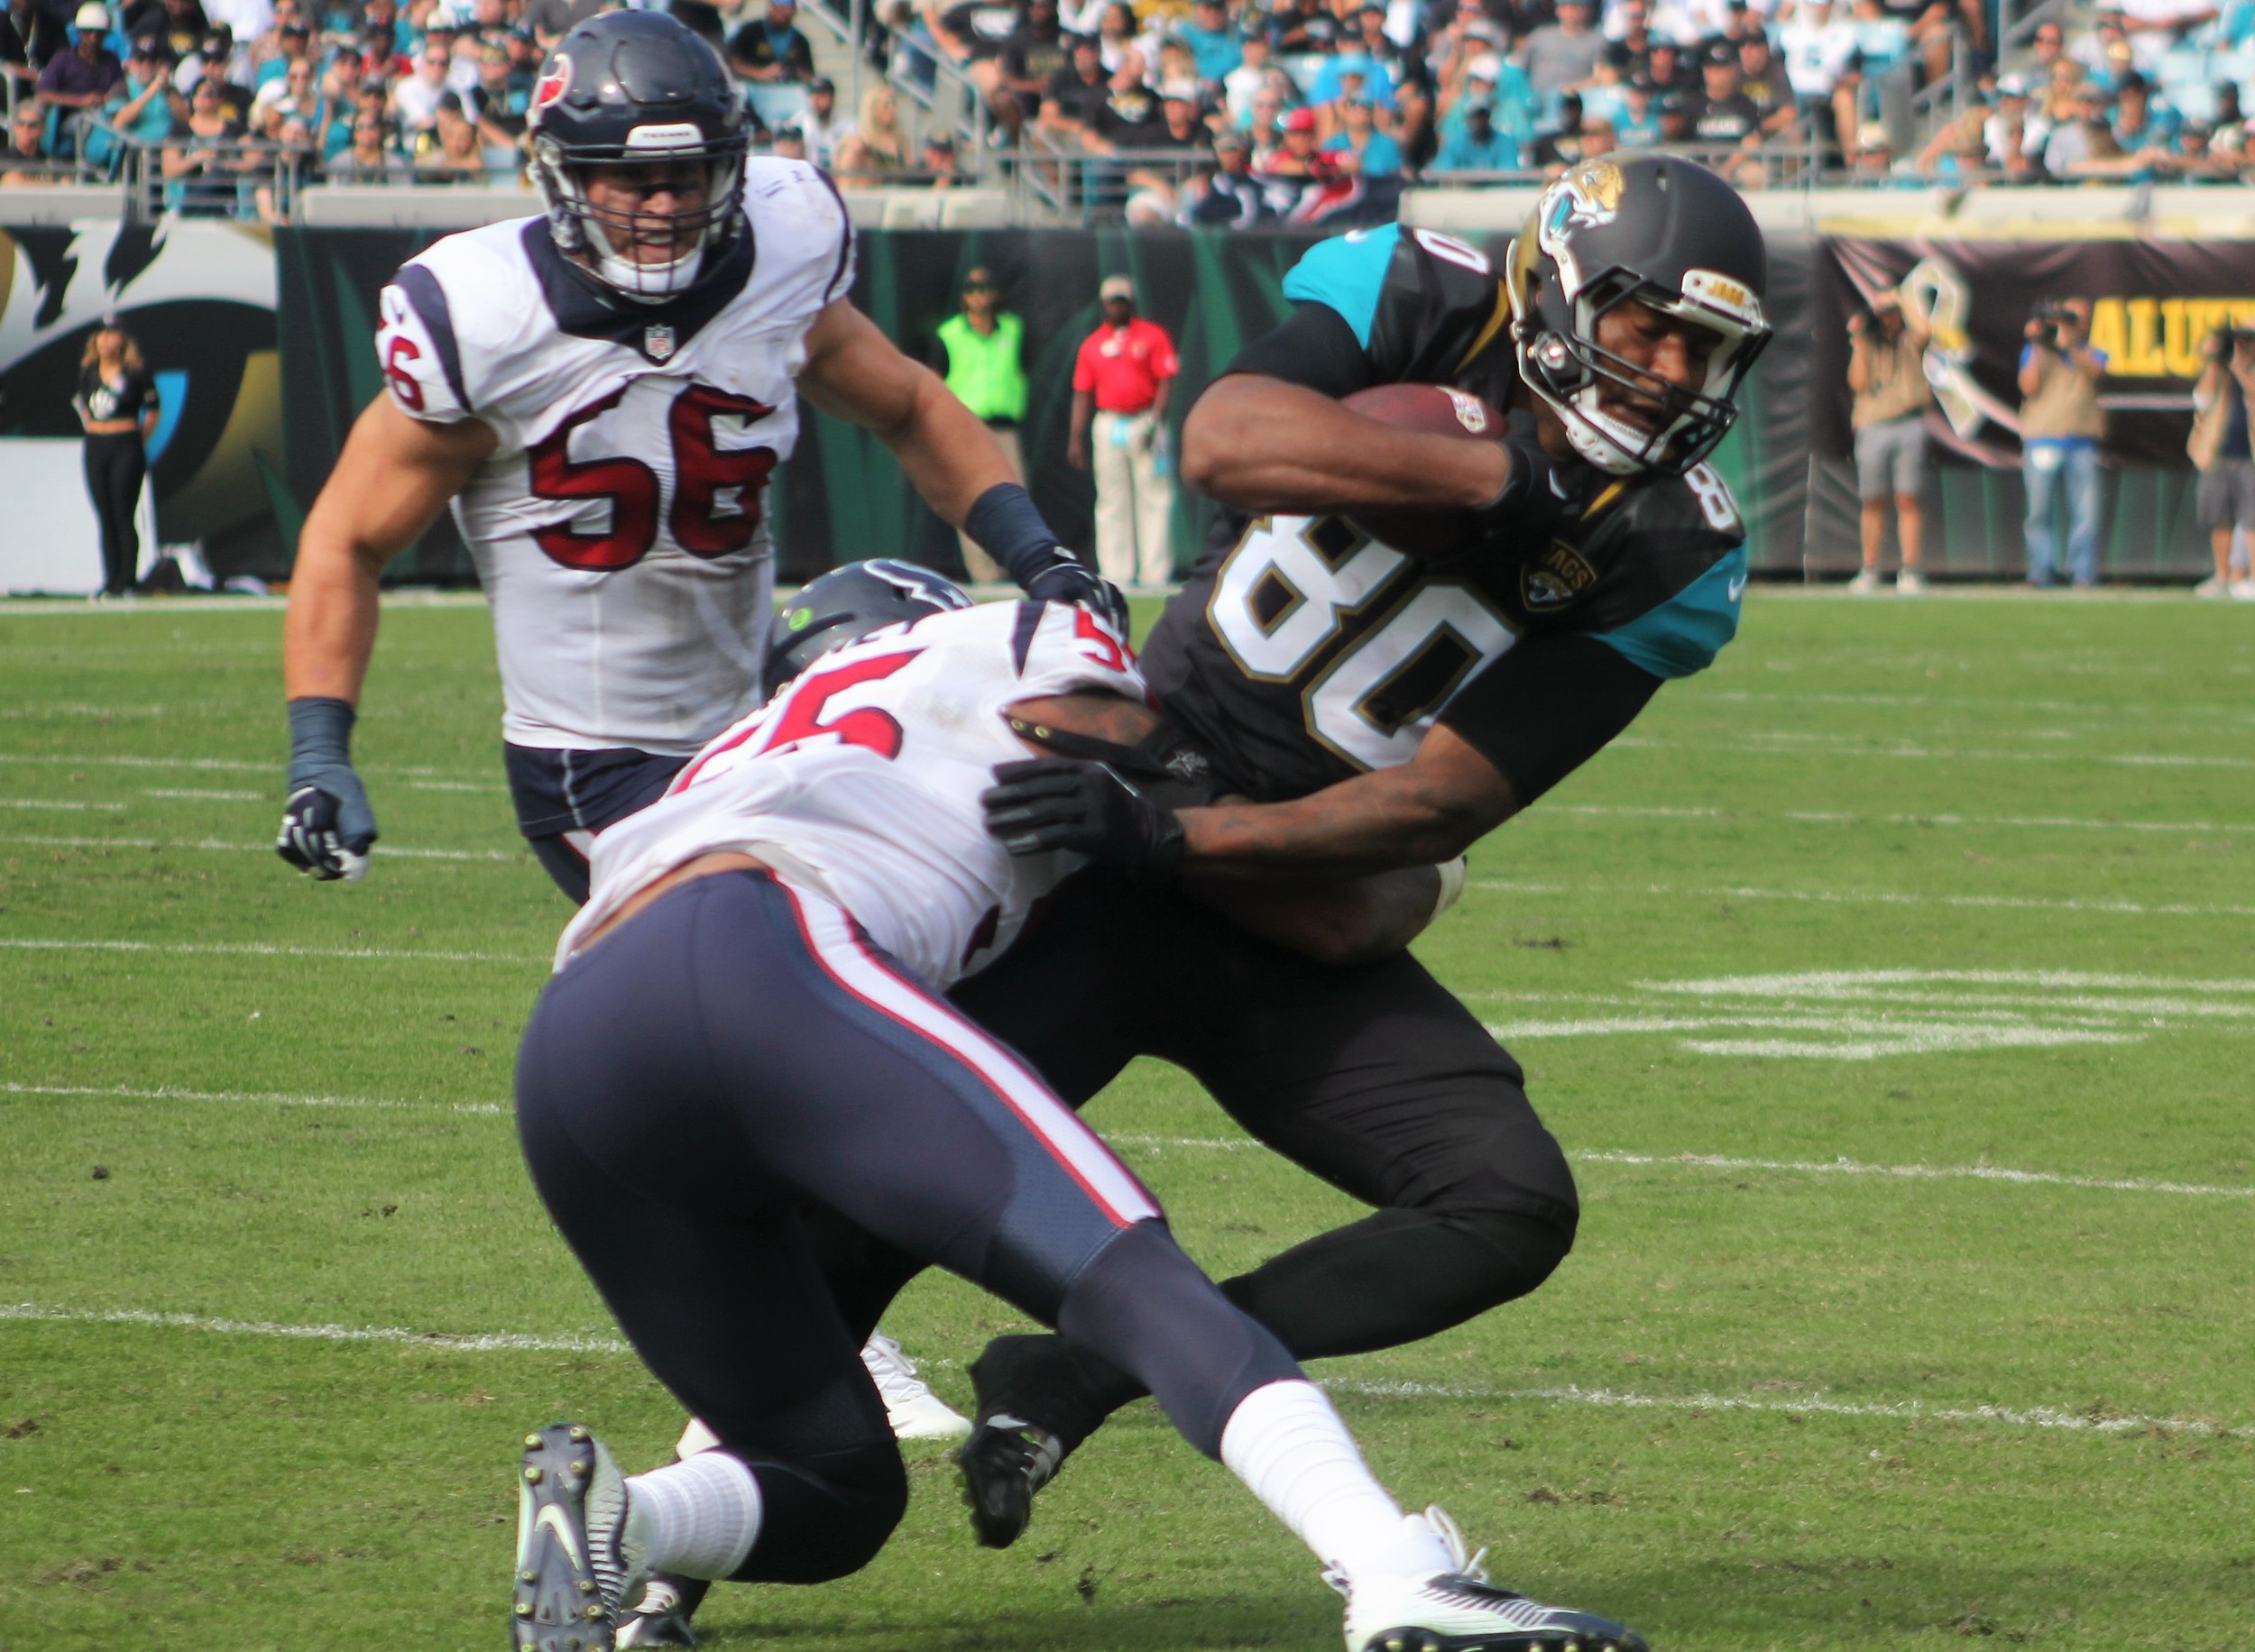 Jacksonville tight end Julius Thomas (80) caught a five-yard TD pass from QB Blake Bortles in the first quarter, which marked Thomas’ 33rd receiving TD since 2013. Thomas’ 33 receiving TDs since 2013 are the most in the NFL over that span by a tight end and the fifth-most overall.